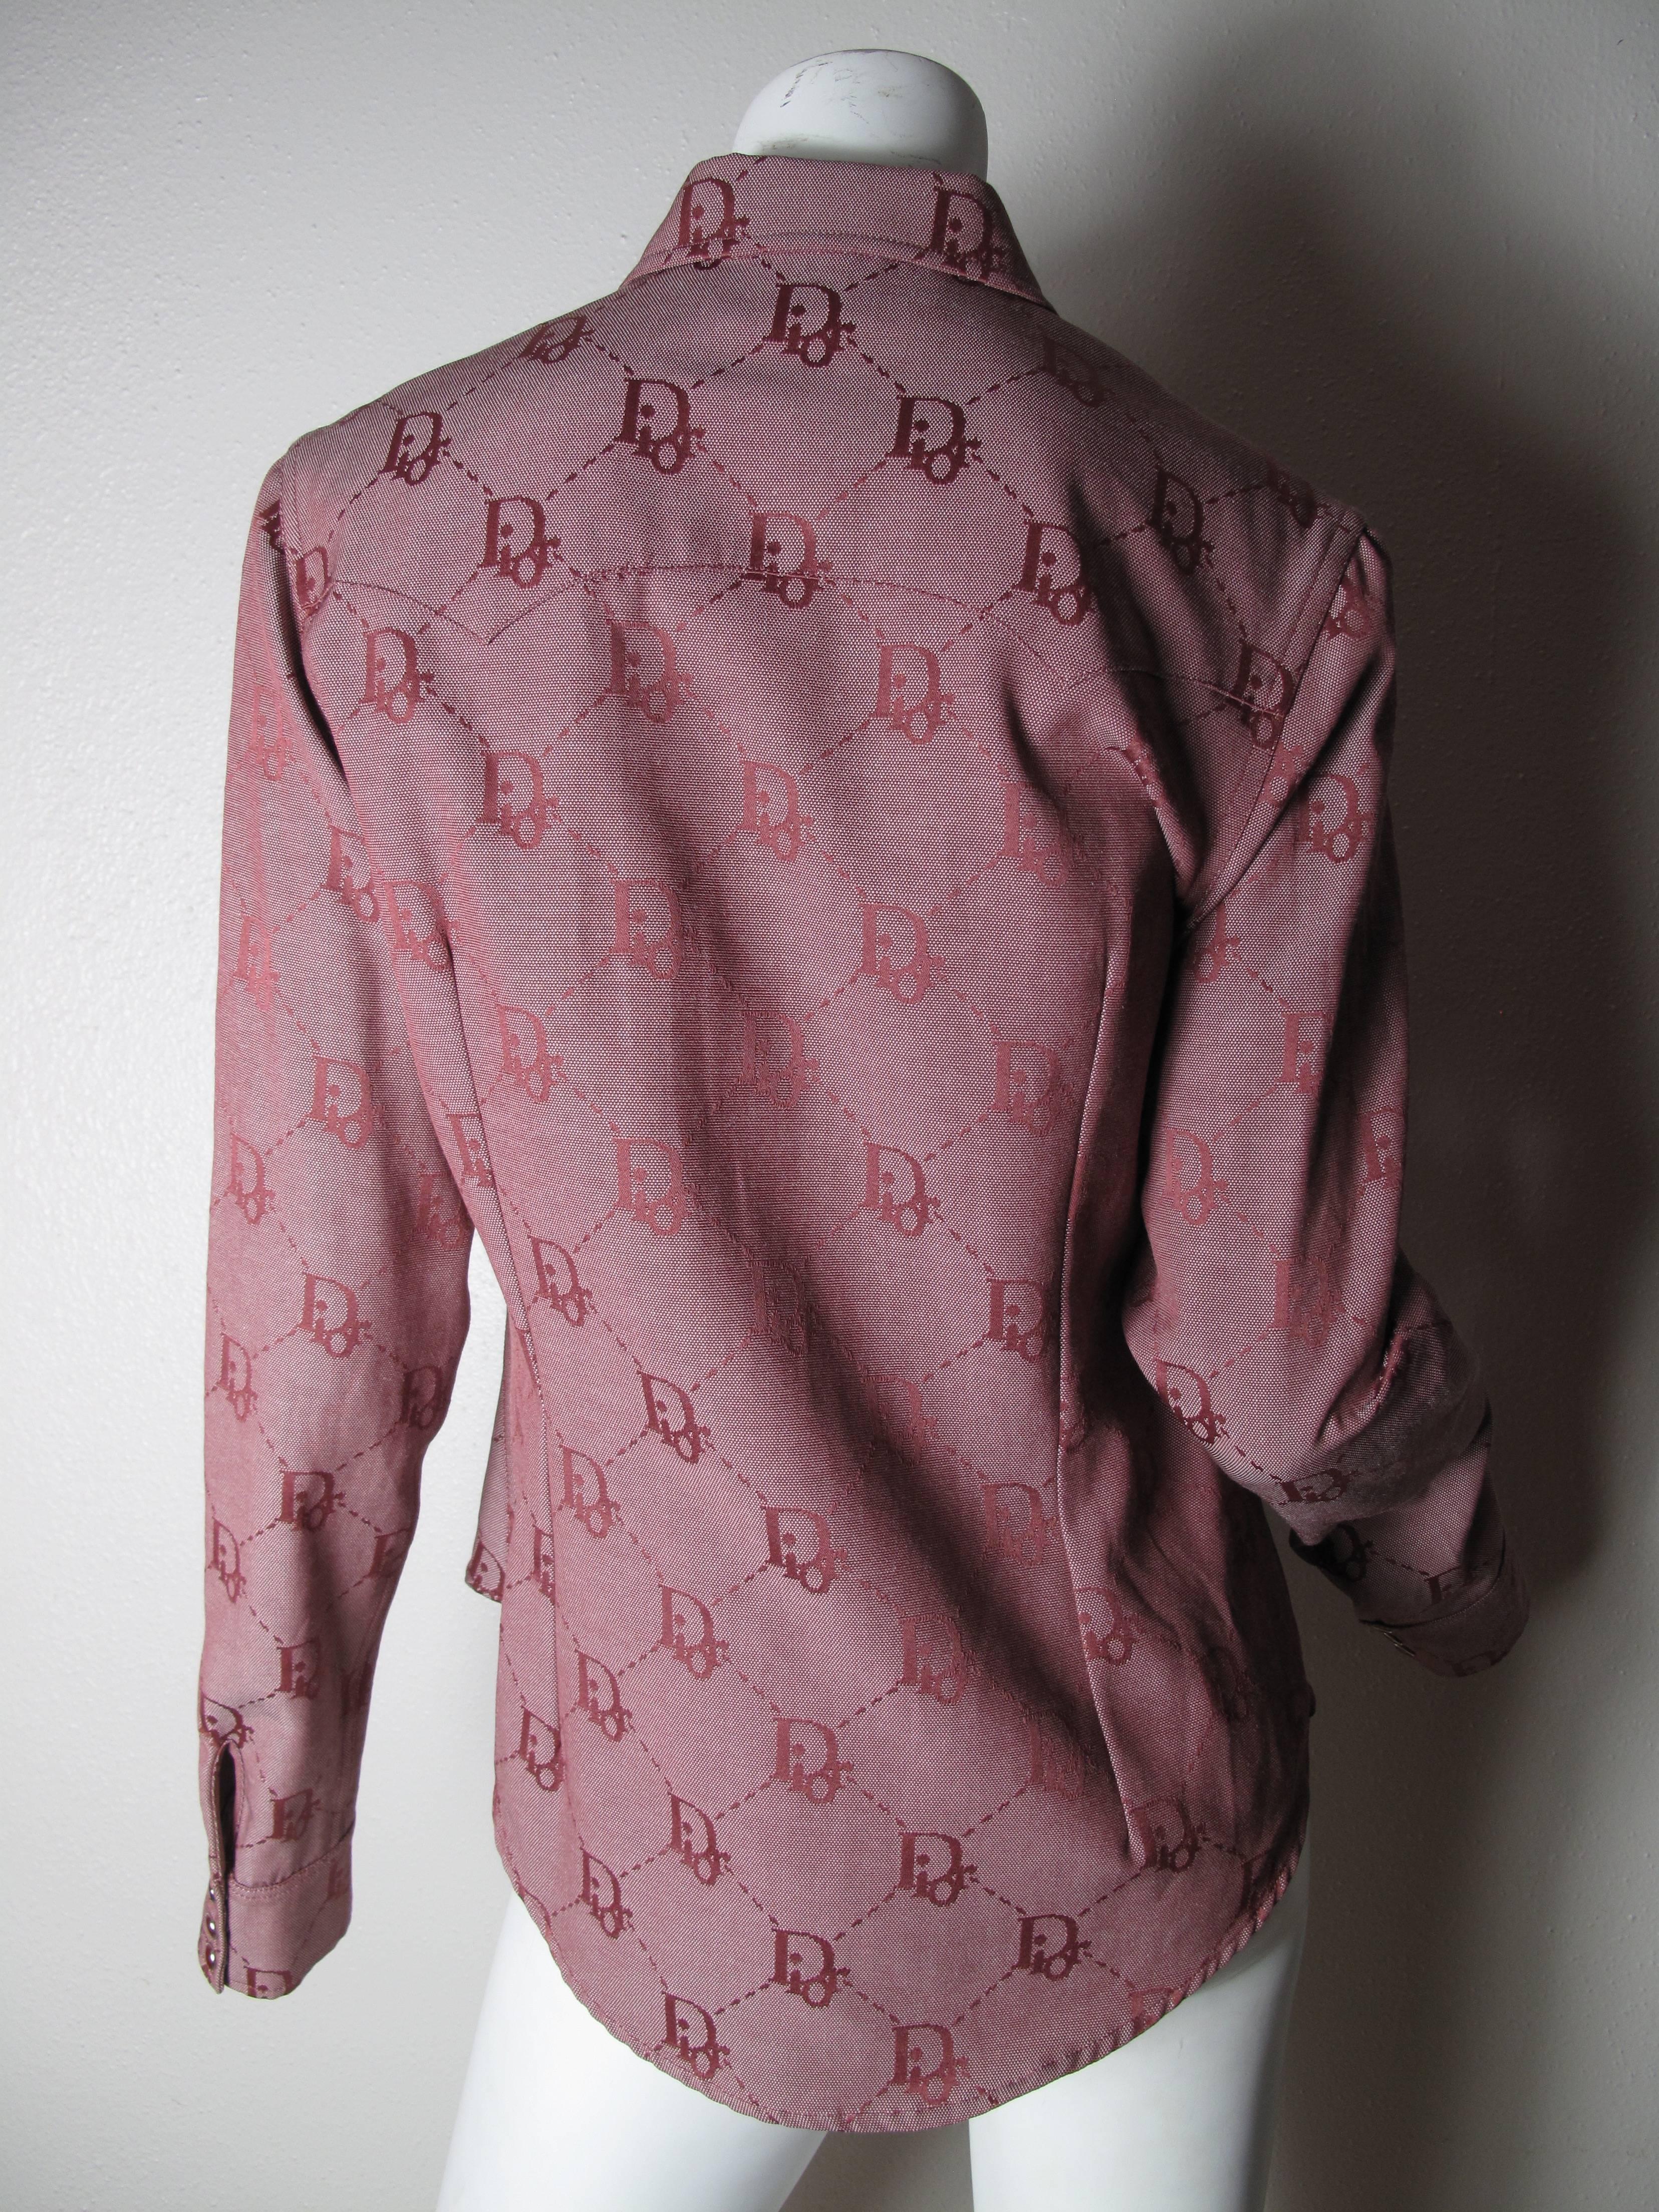 Christian Dior pink cotton, polyester logo cowboy shirt. Snaps to close and on pockets, cuffs. Condition: Excellent. Size 10, F 42

We accept returns for refund, please see our terms.  We offer free ground shipping within the US.  Please let us know